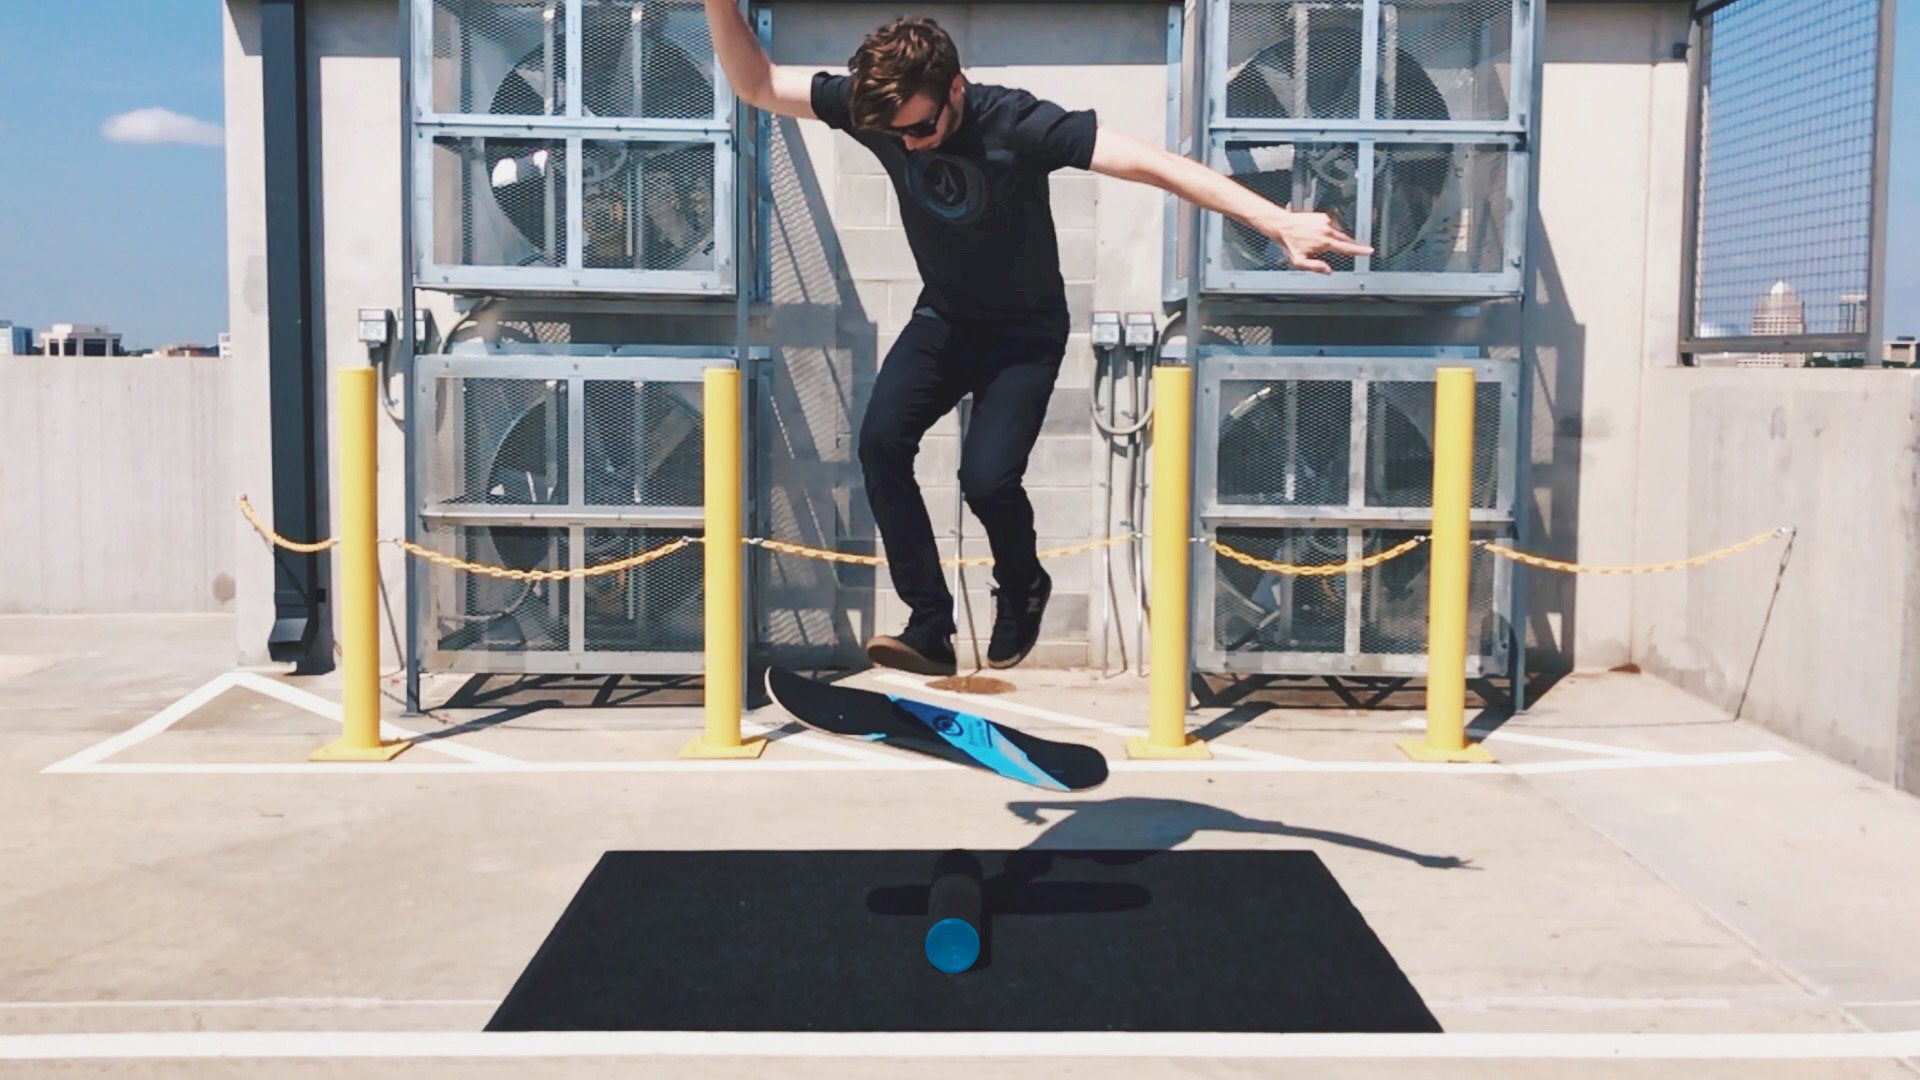 A man showcasing impressive tricks on a Revolution Core 32 Balance Board in a parking lot, demonstrating remarkable balance and skilled progression.